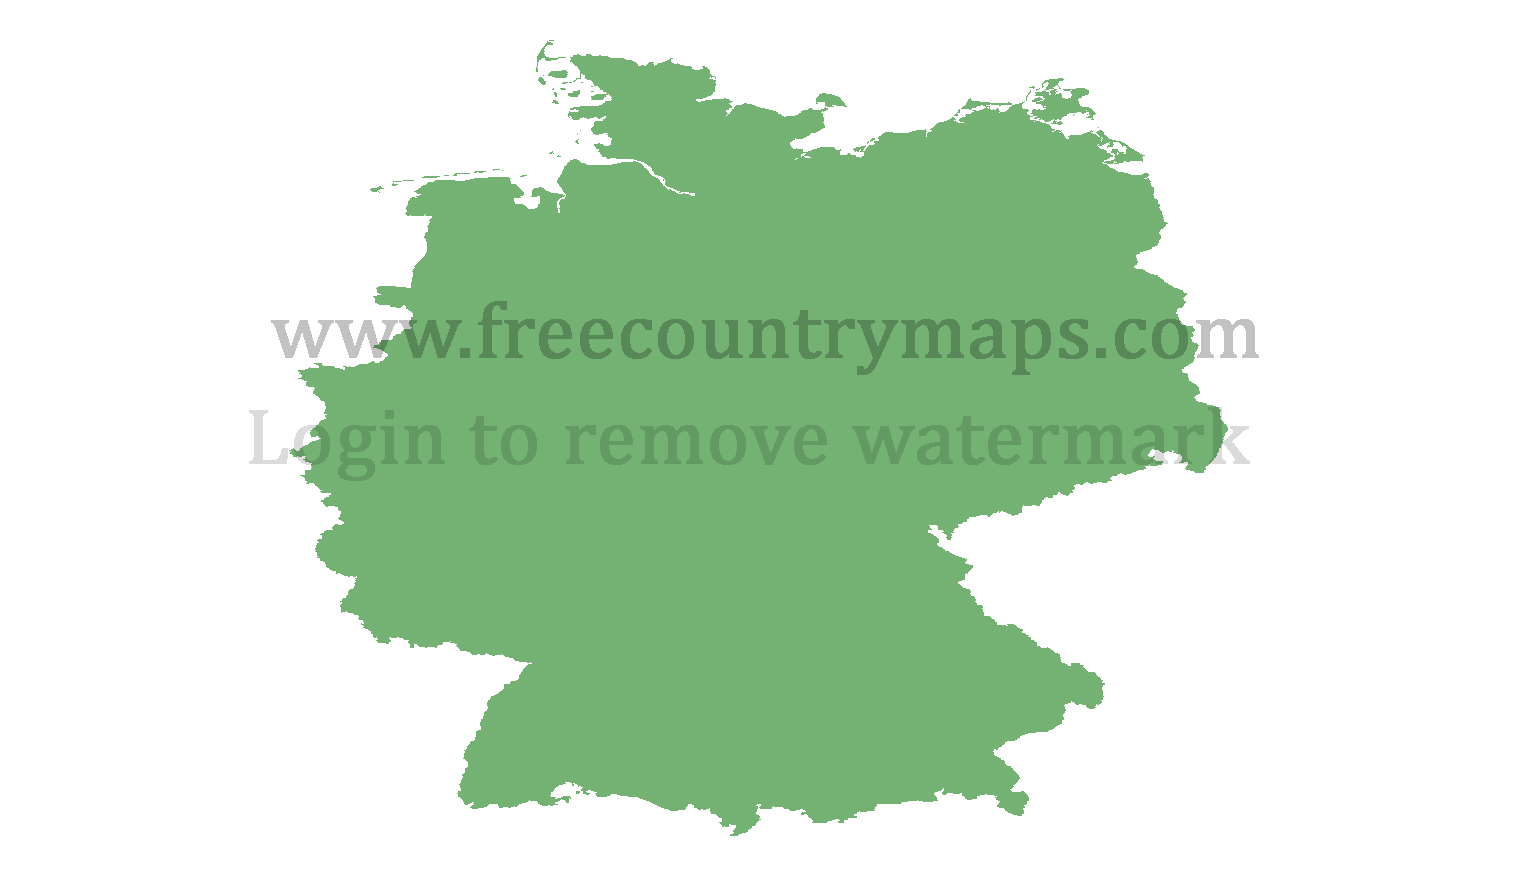 Blank Map of Germany